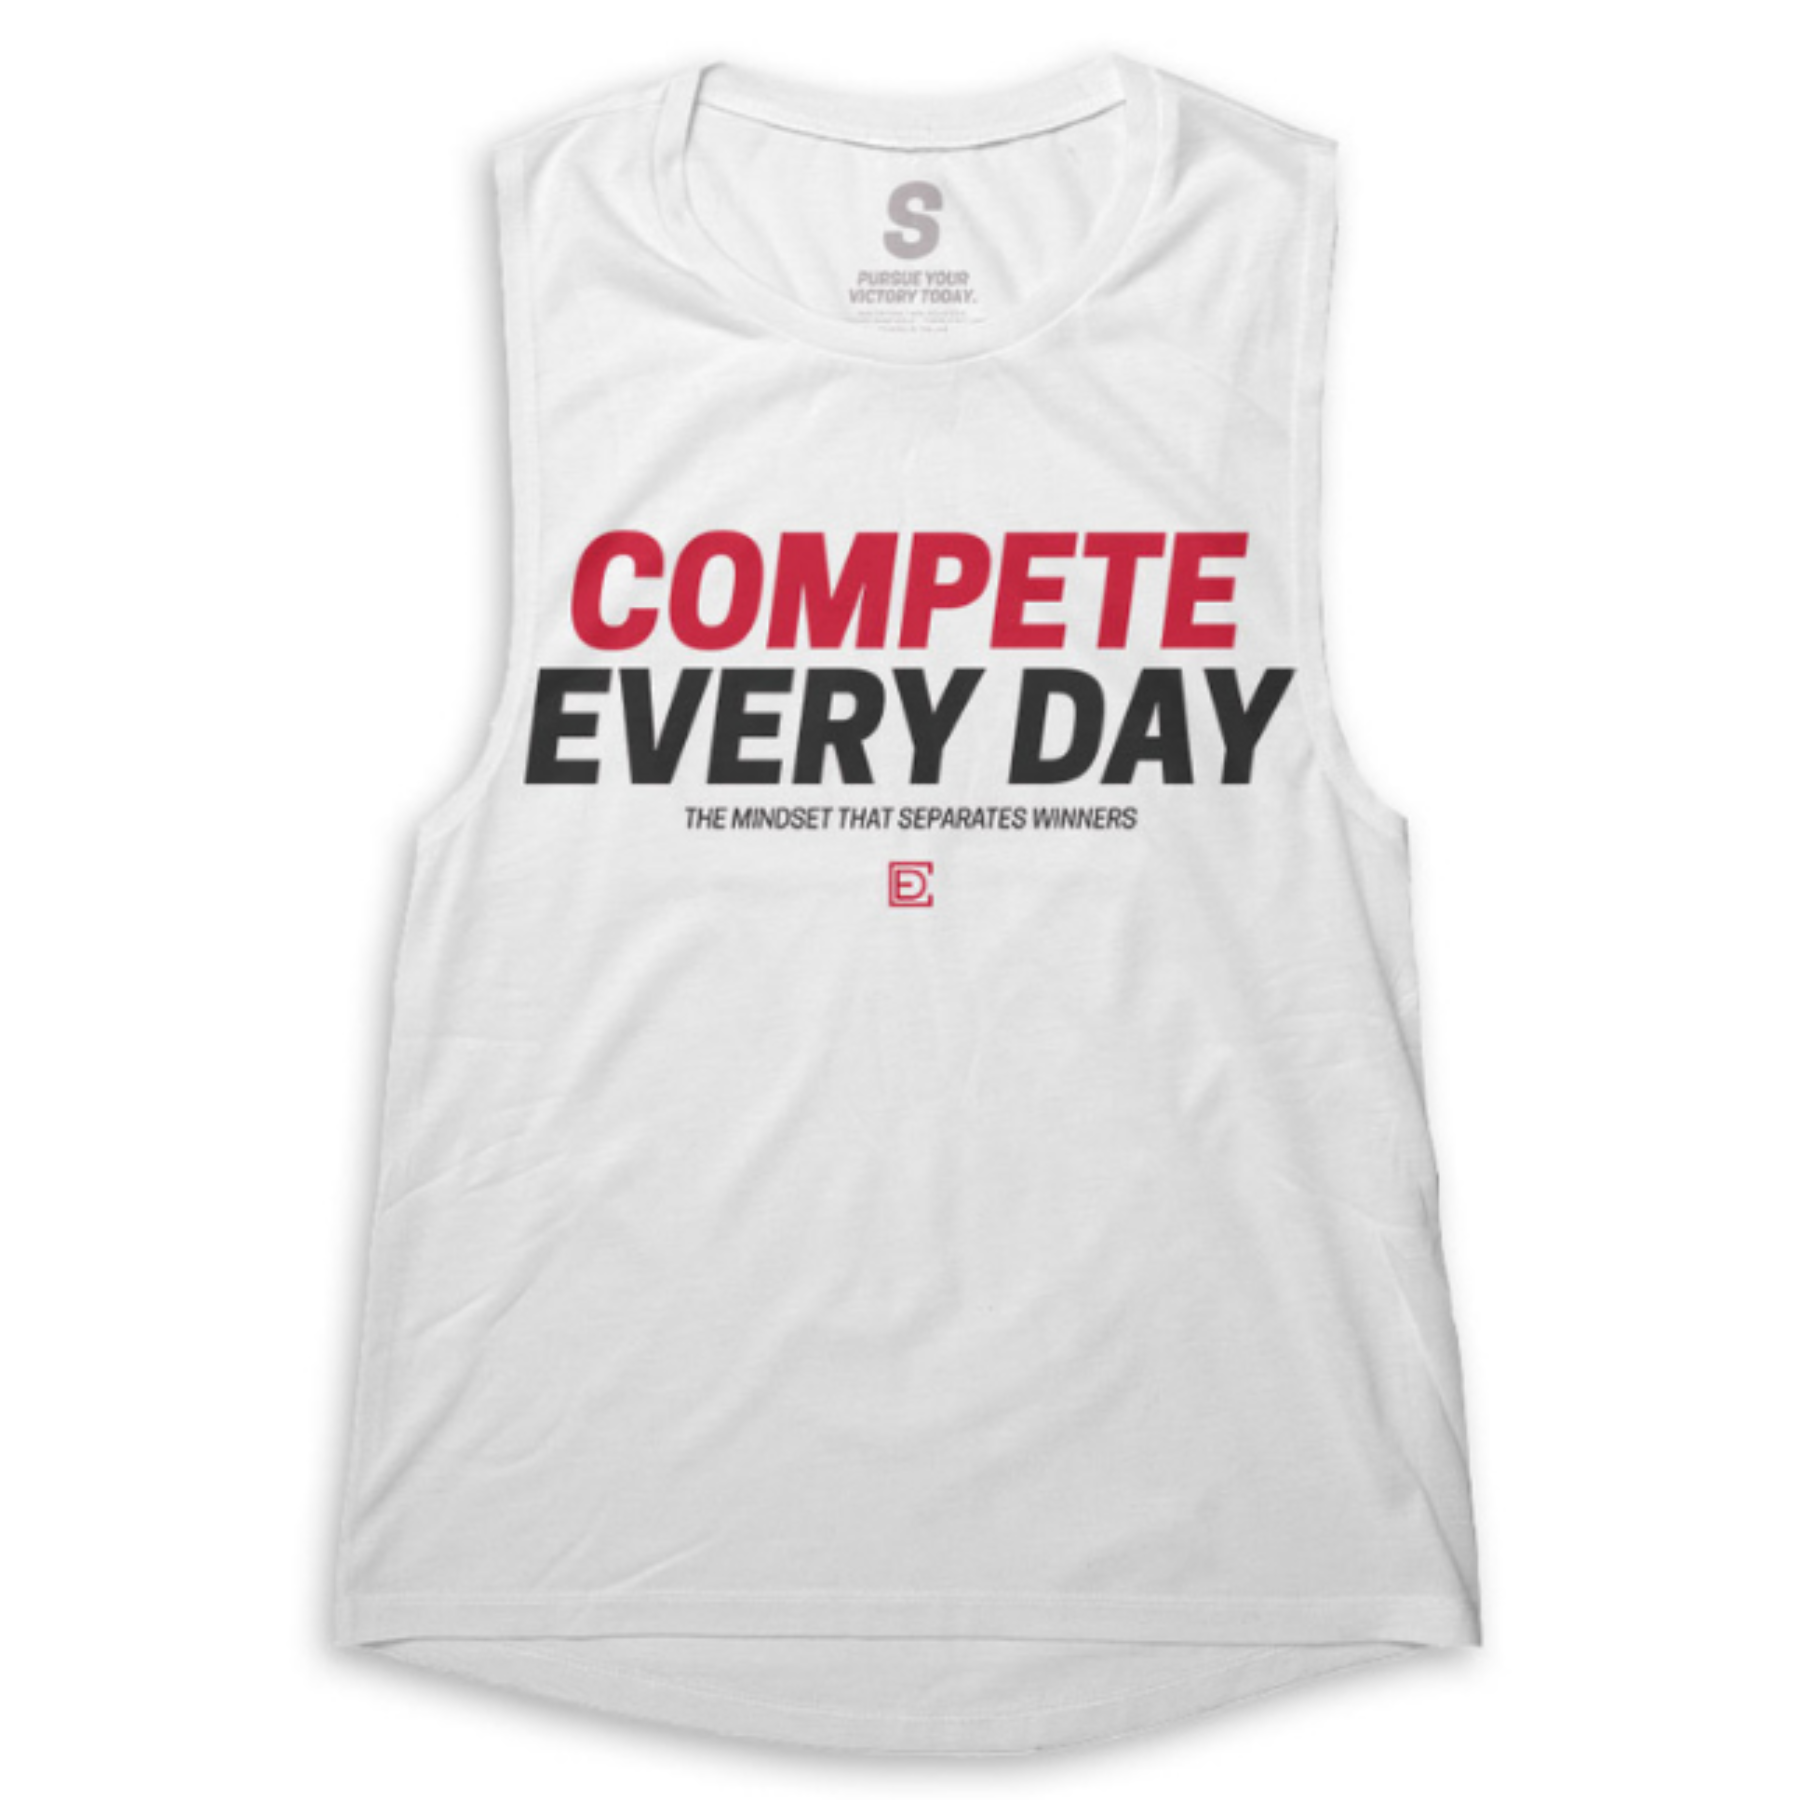 Compete Every Day Mentality Women's Tanktop